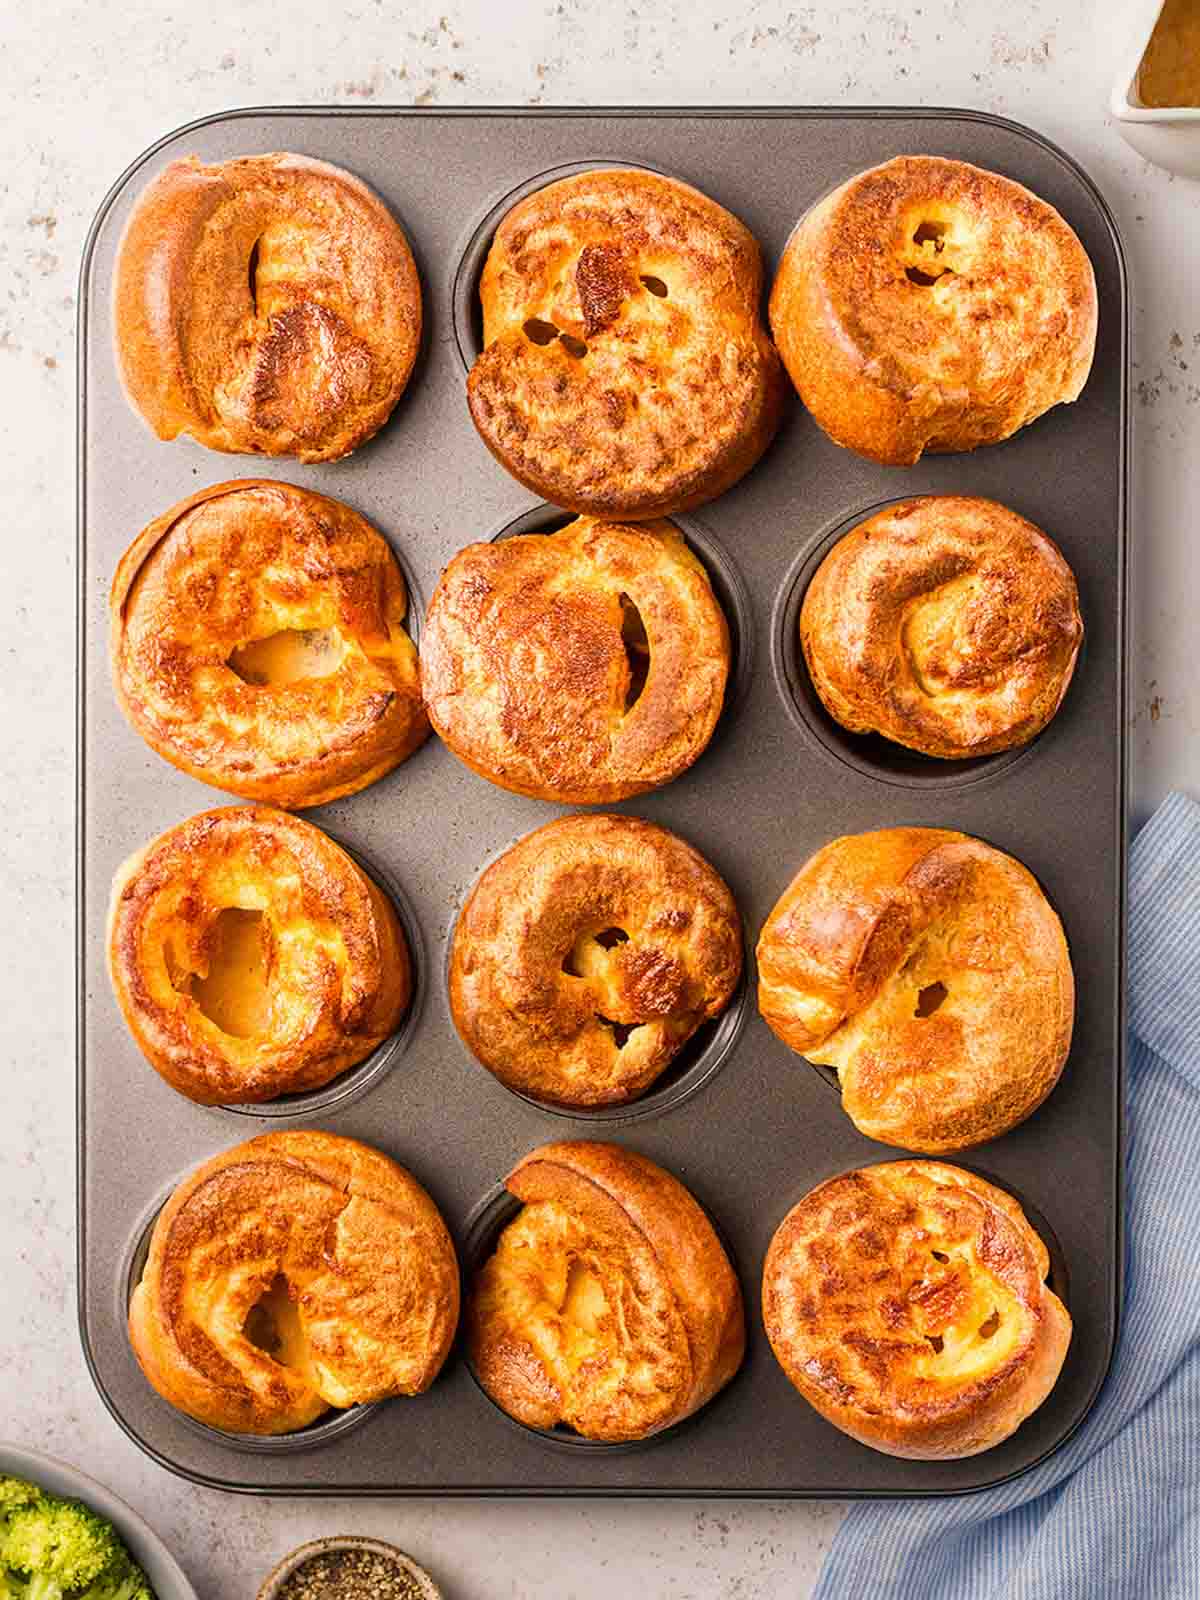 A muffin tray filled with 12 perfect Yorkshire Puddings, ready to eat.